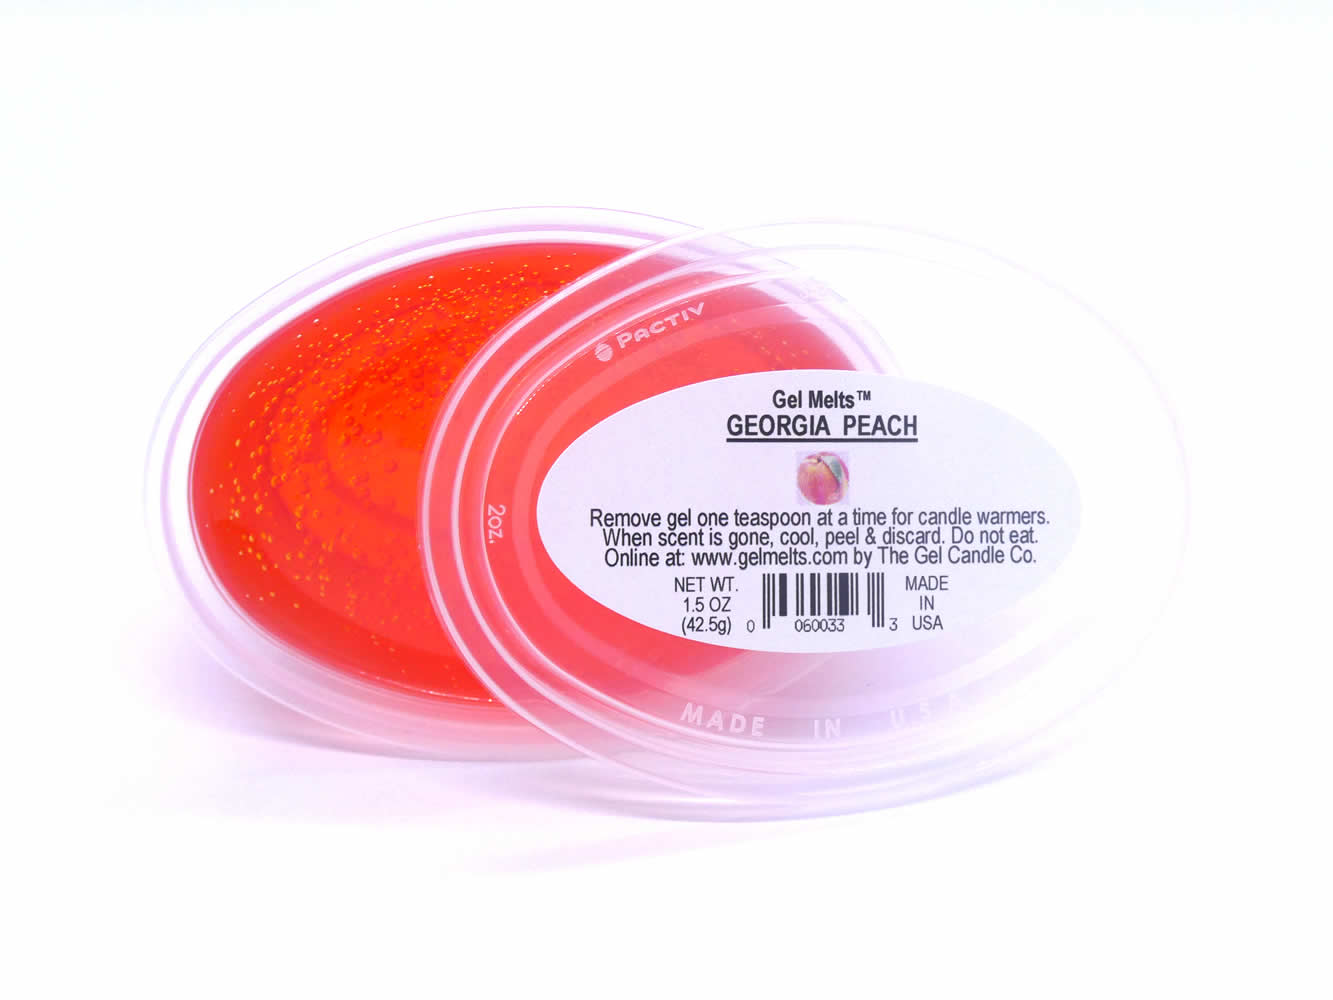 3 Pack PINK ICE Inspired Aroma Gel Melts™ Gel Wax For Warmers And Burners  By The Gel Candle Company PEEL, MELT AND ENJOY